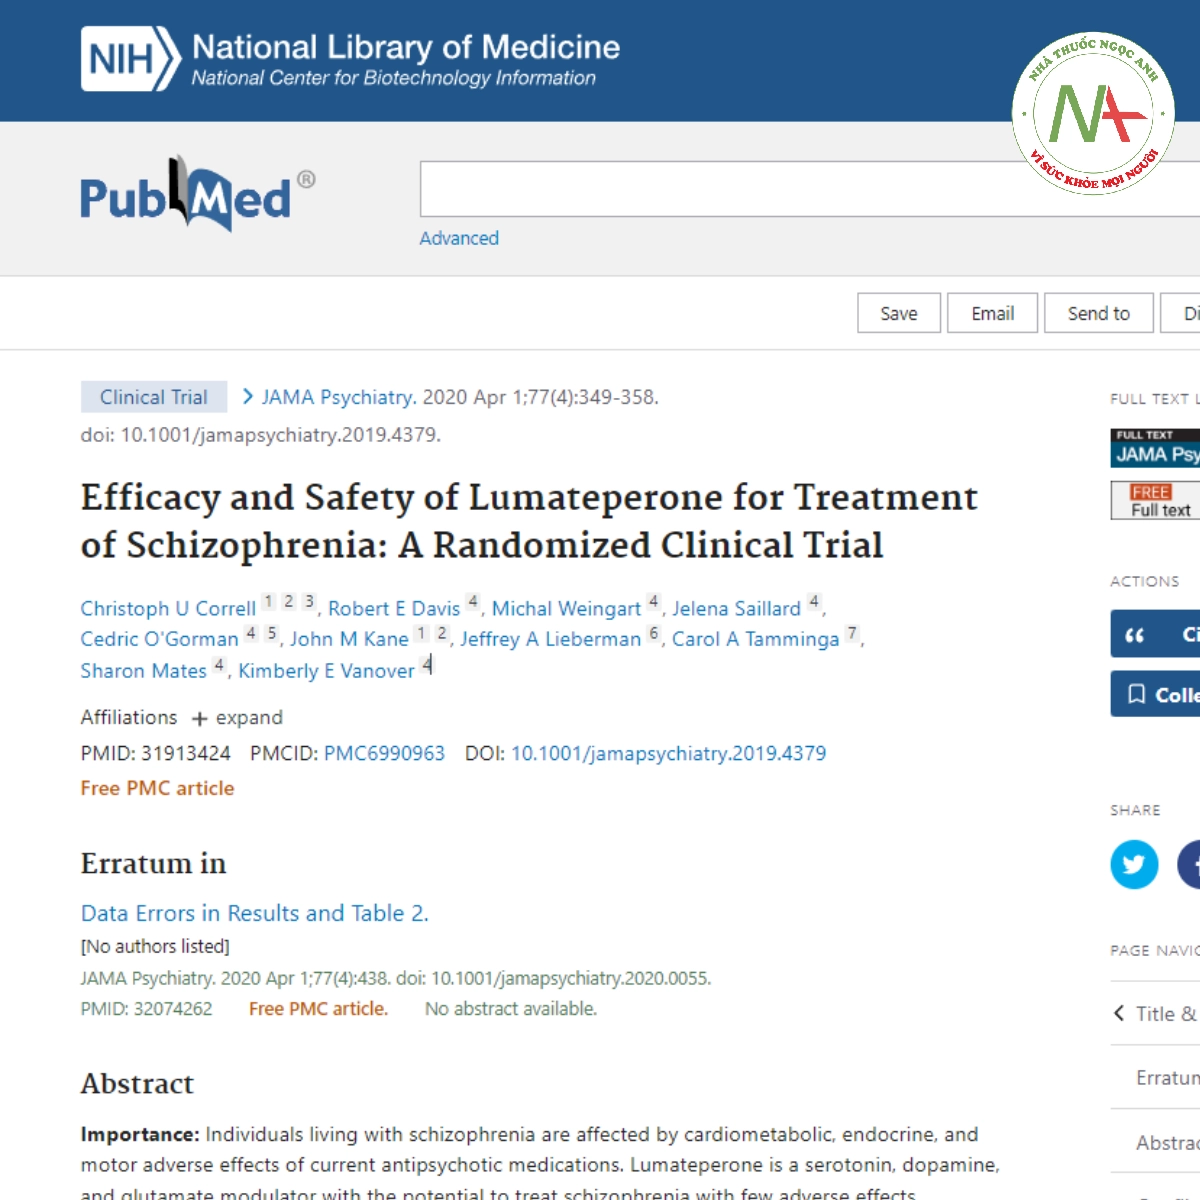 Efficacy and Safety of Lumateperone for Treatment of Schizophrenia: A Randomized Clinical Trial